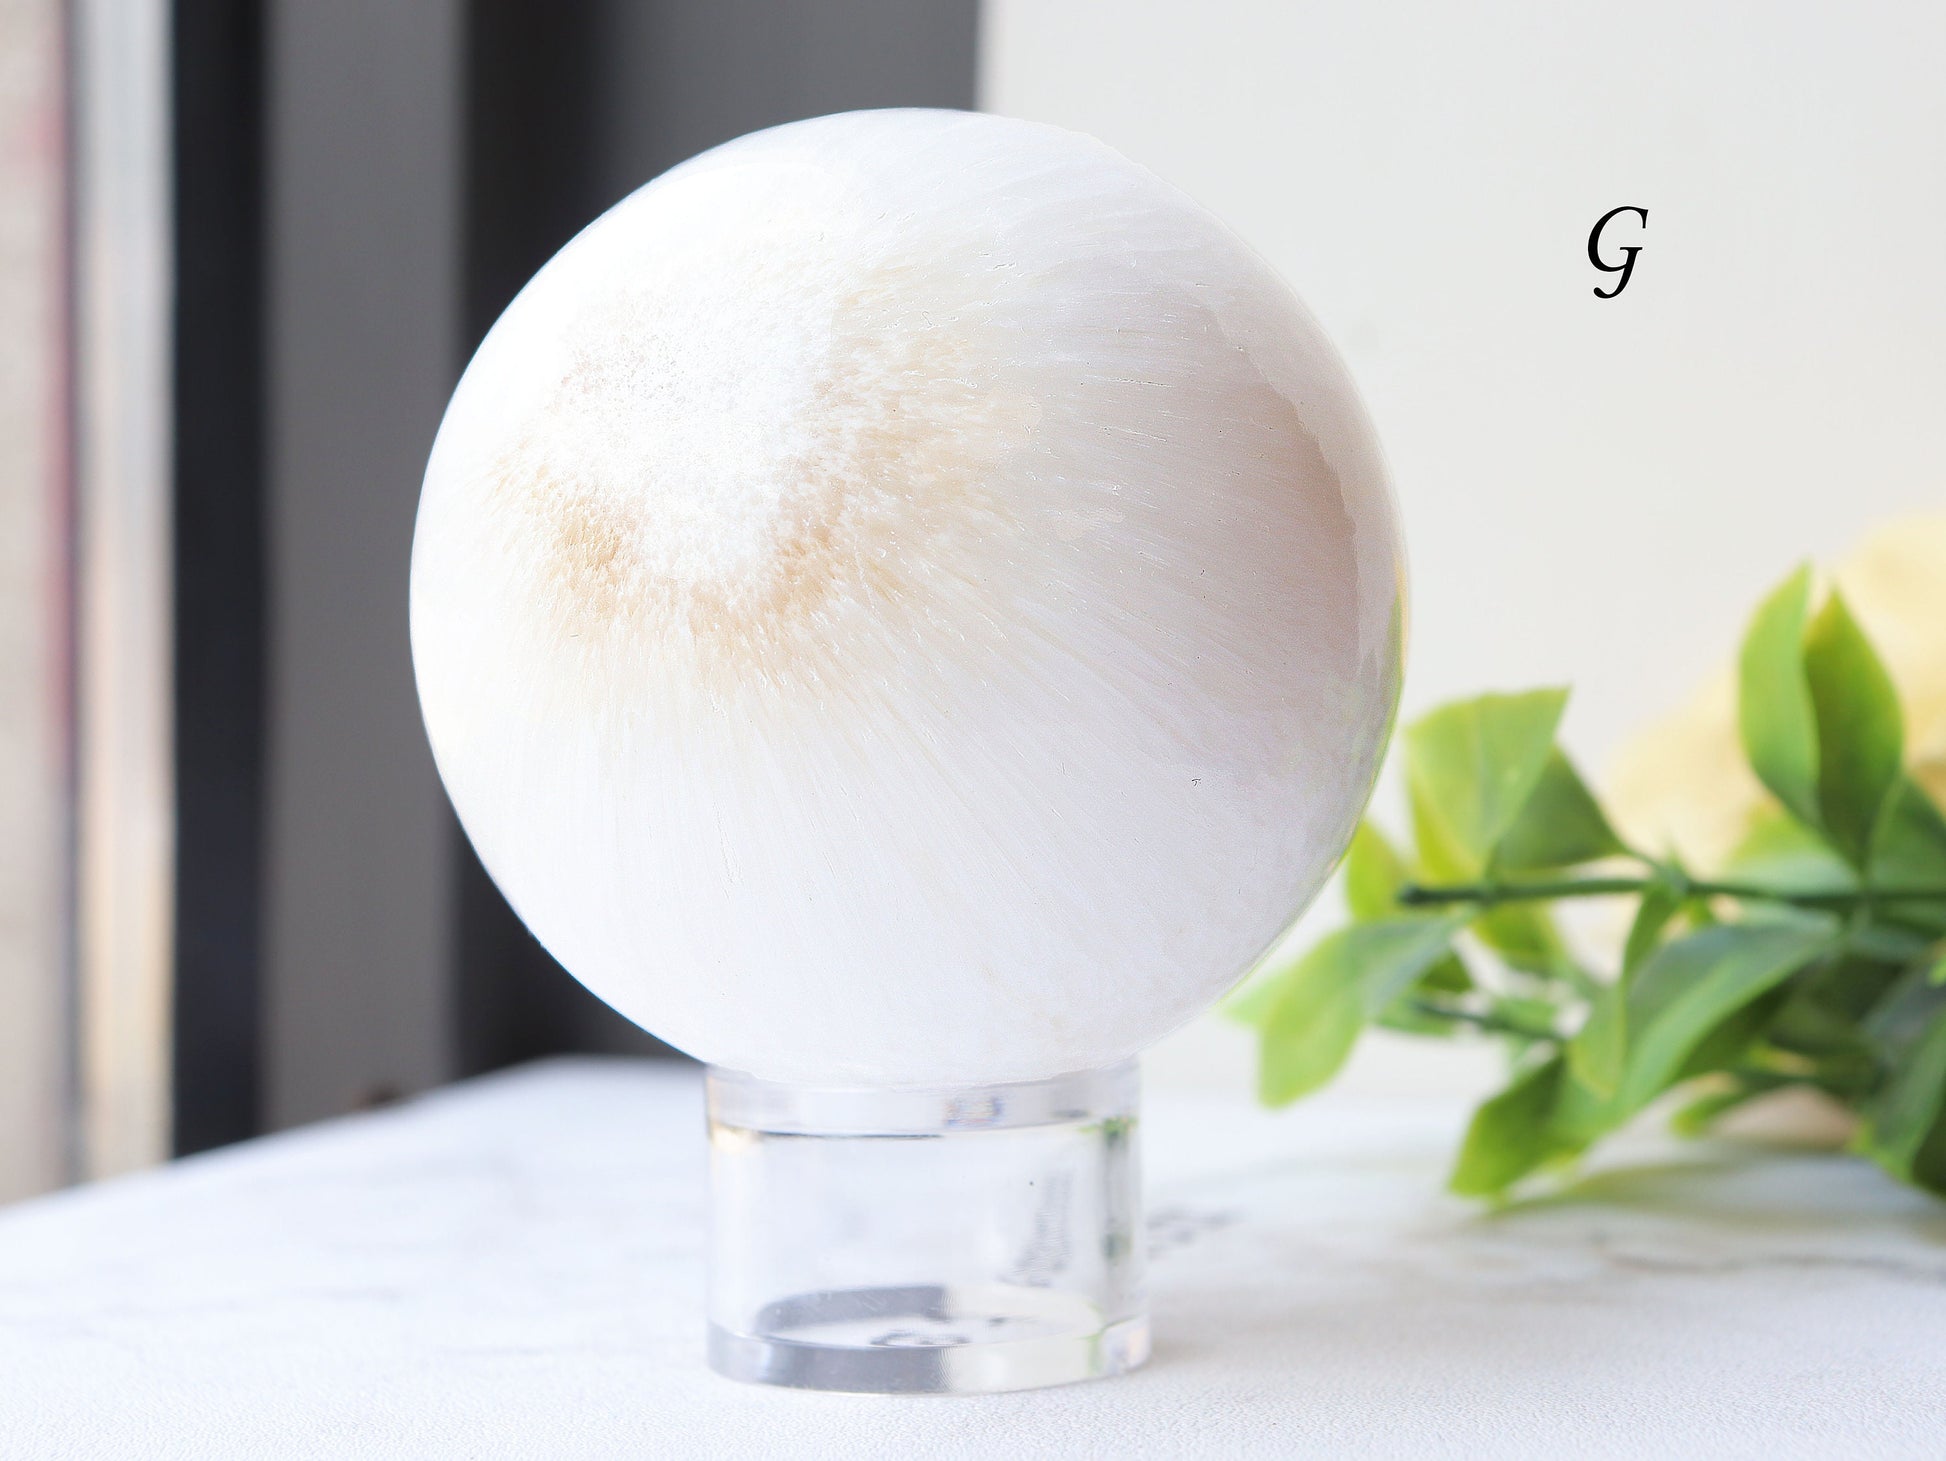 Scolecite Polished Spheres, Ethically Sourced, Meditation and Dream Stone, Tranquility and Peace